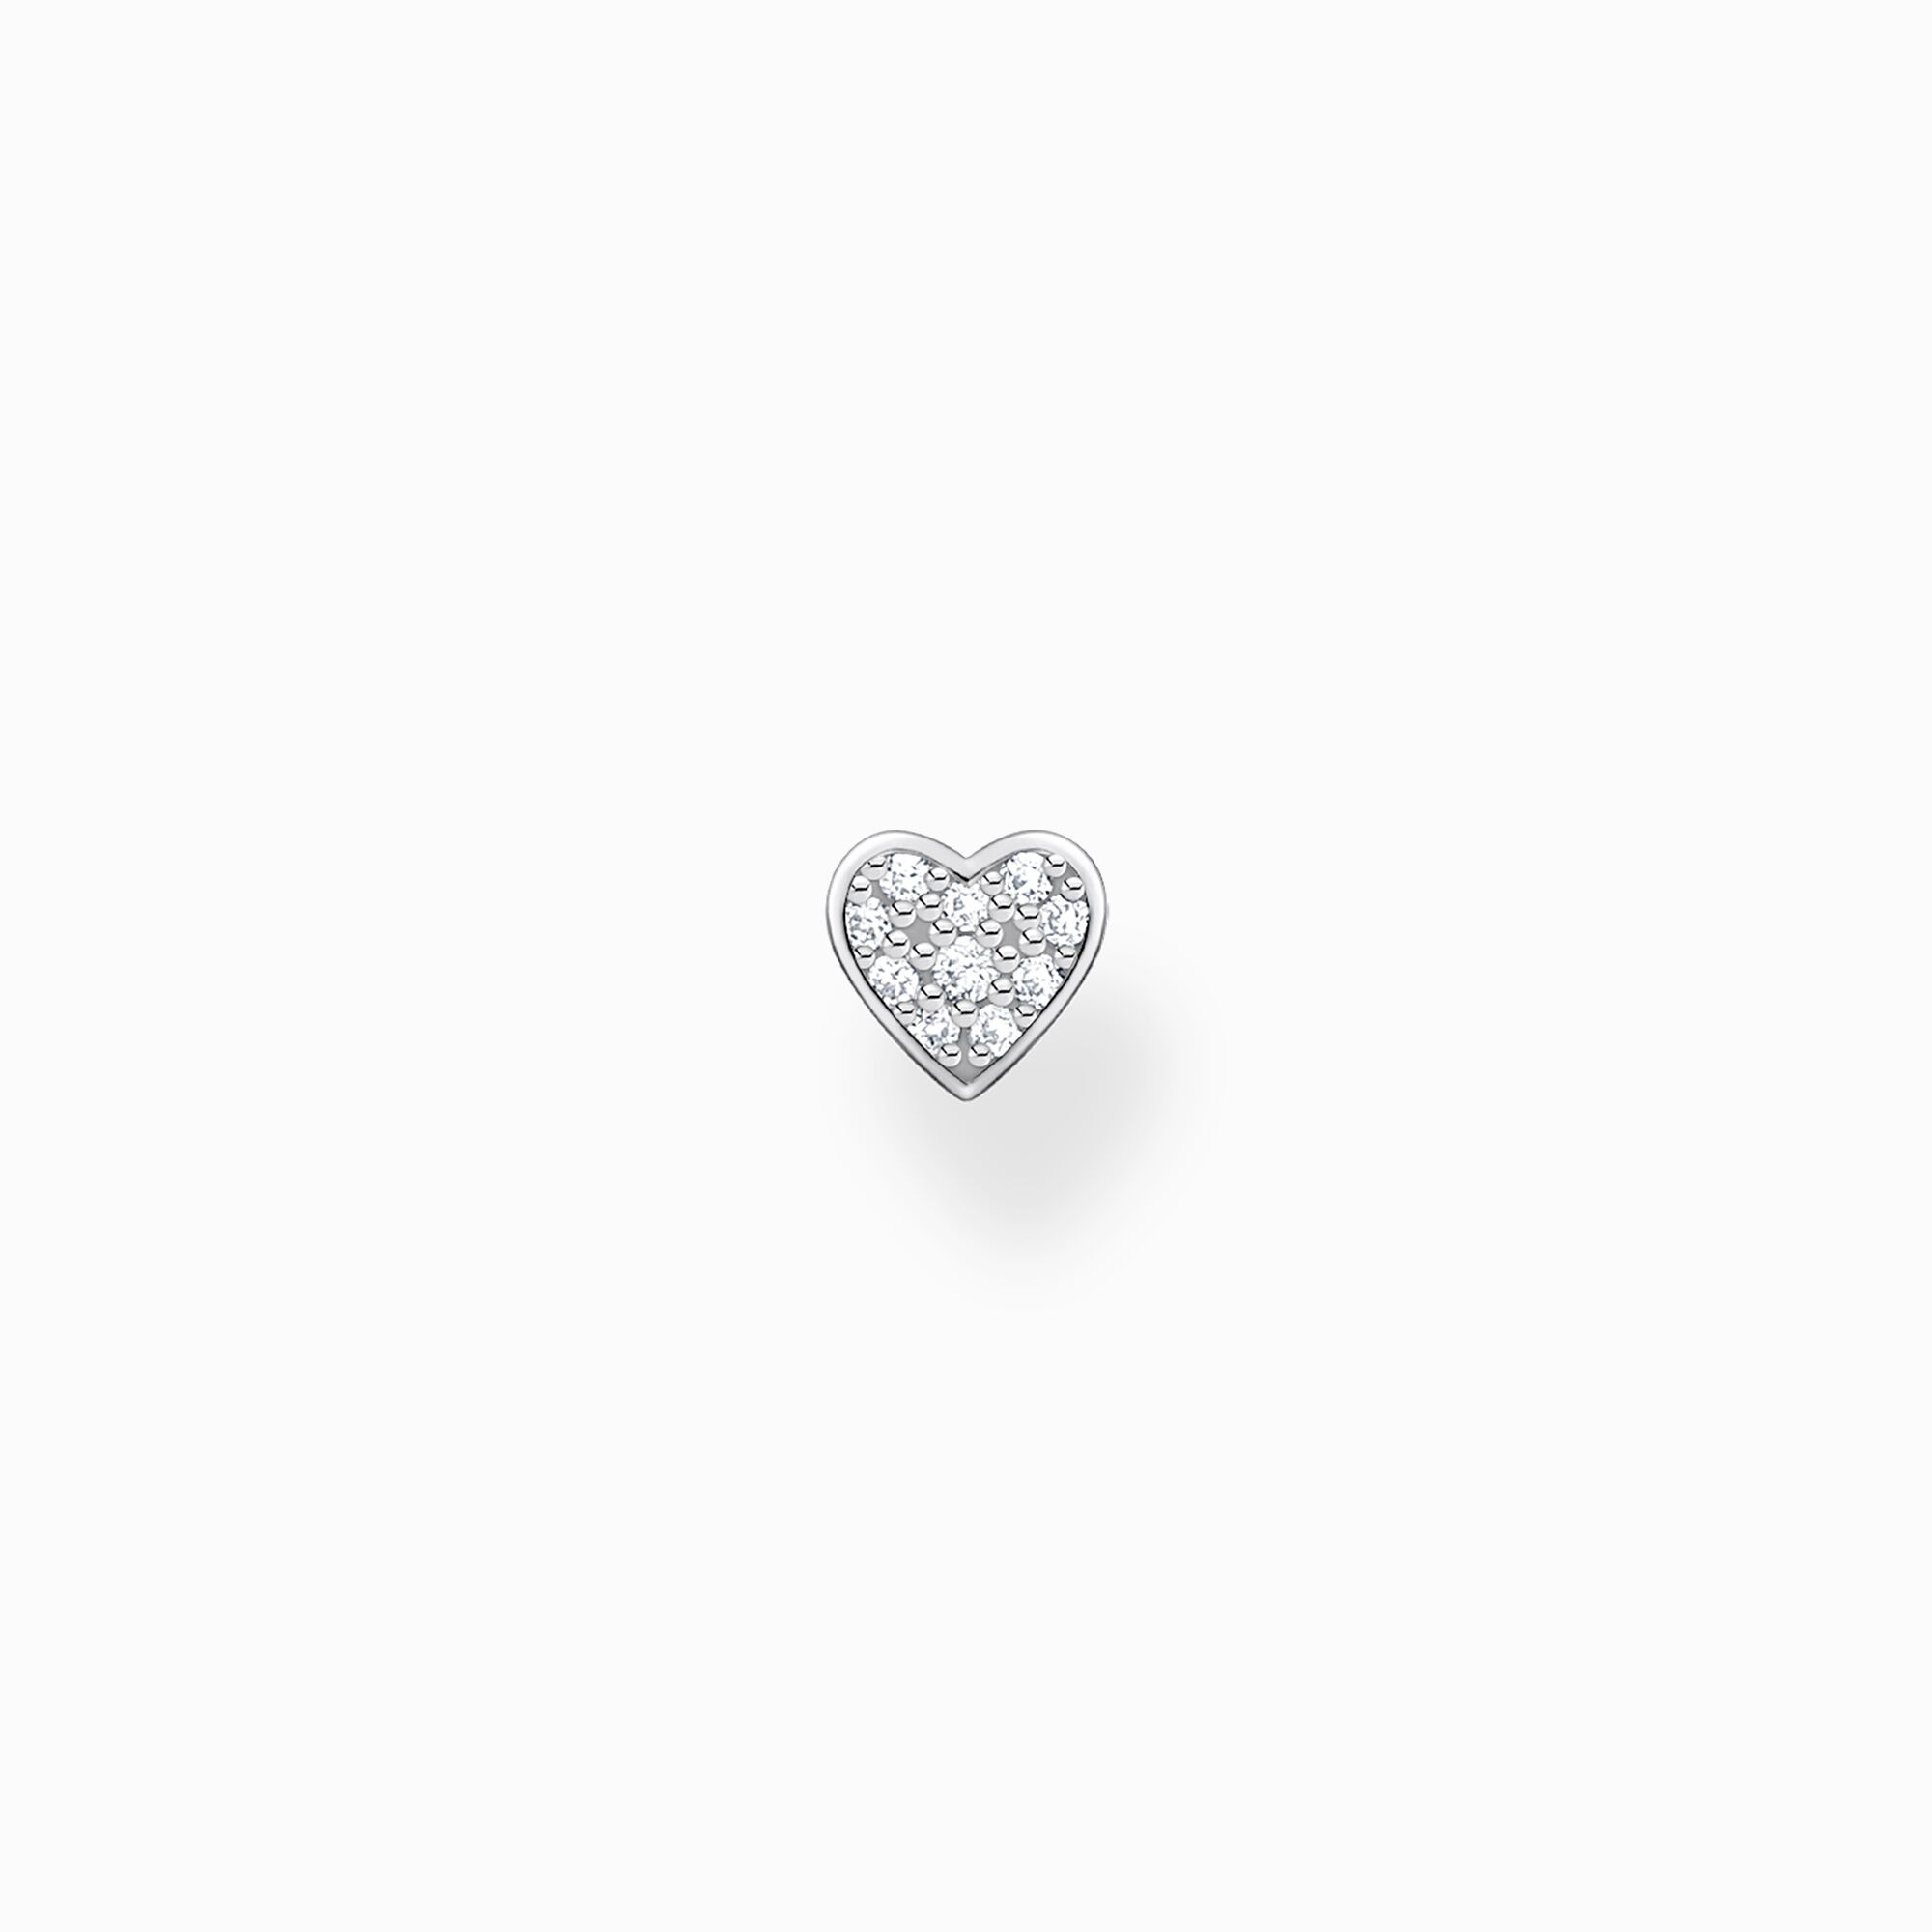 Single ear stud heart pav&eacute; silver from the Charming Collection collection in the THOMAS SABO online store